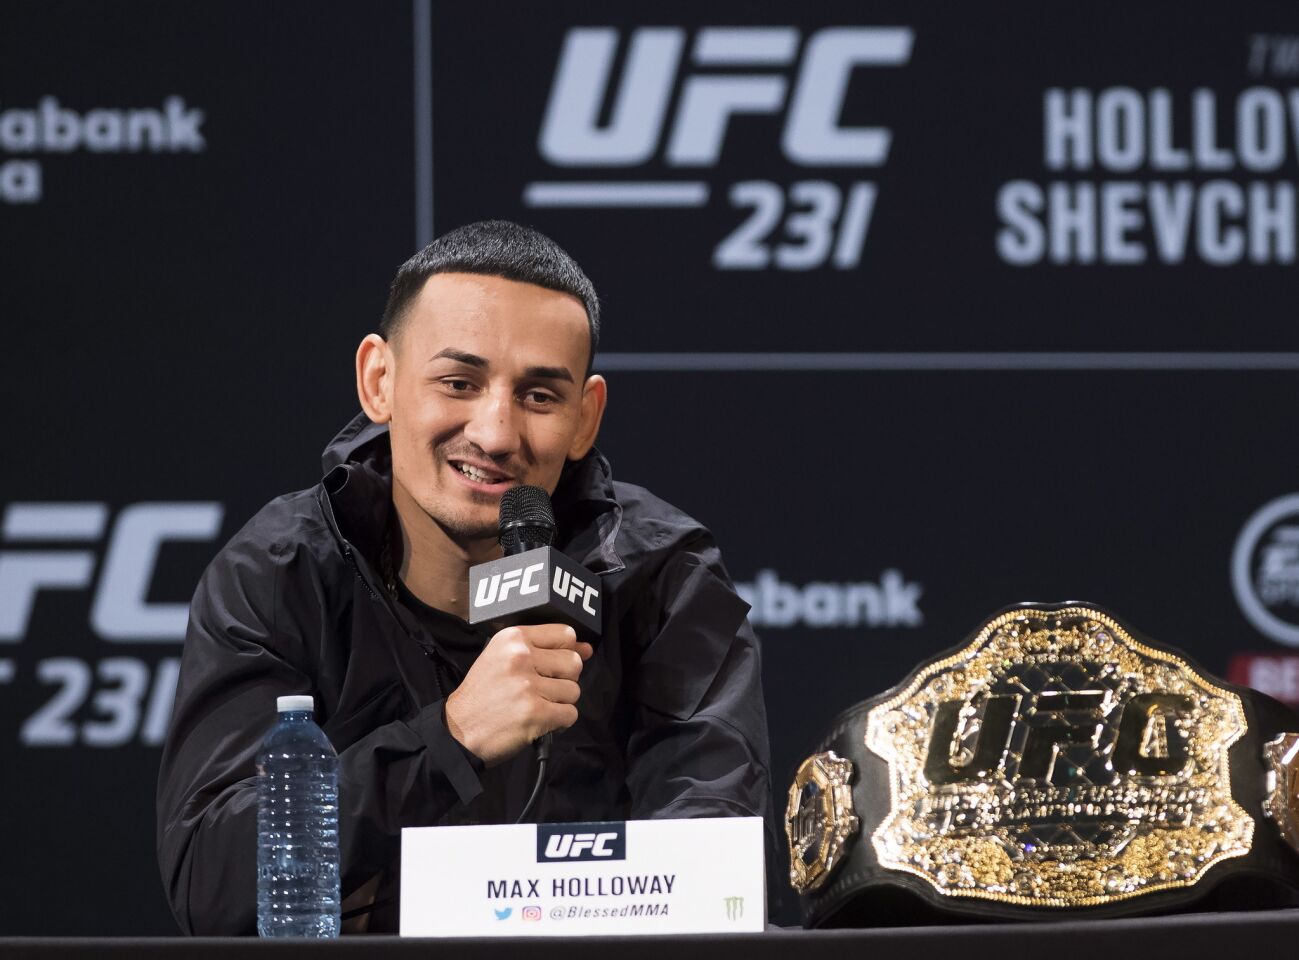 UFC featherweight champion Max Holloway speaks at a press conference, Wednesday, Dec. 5, 2018 in Toronto. UFC 231 takes place on Saturday, Dec. 8, 2018. (Nathan Denette/The Canadian Press via AP)